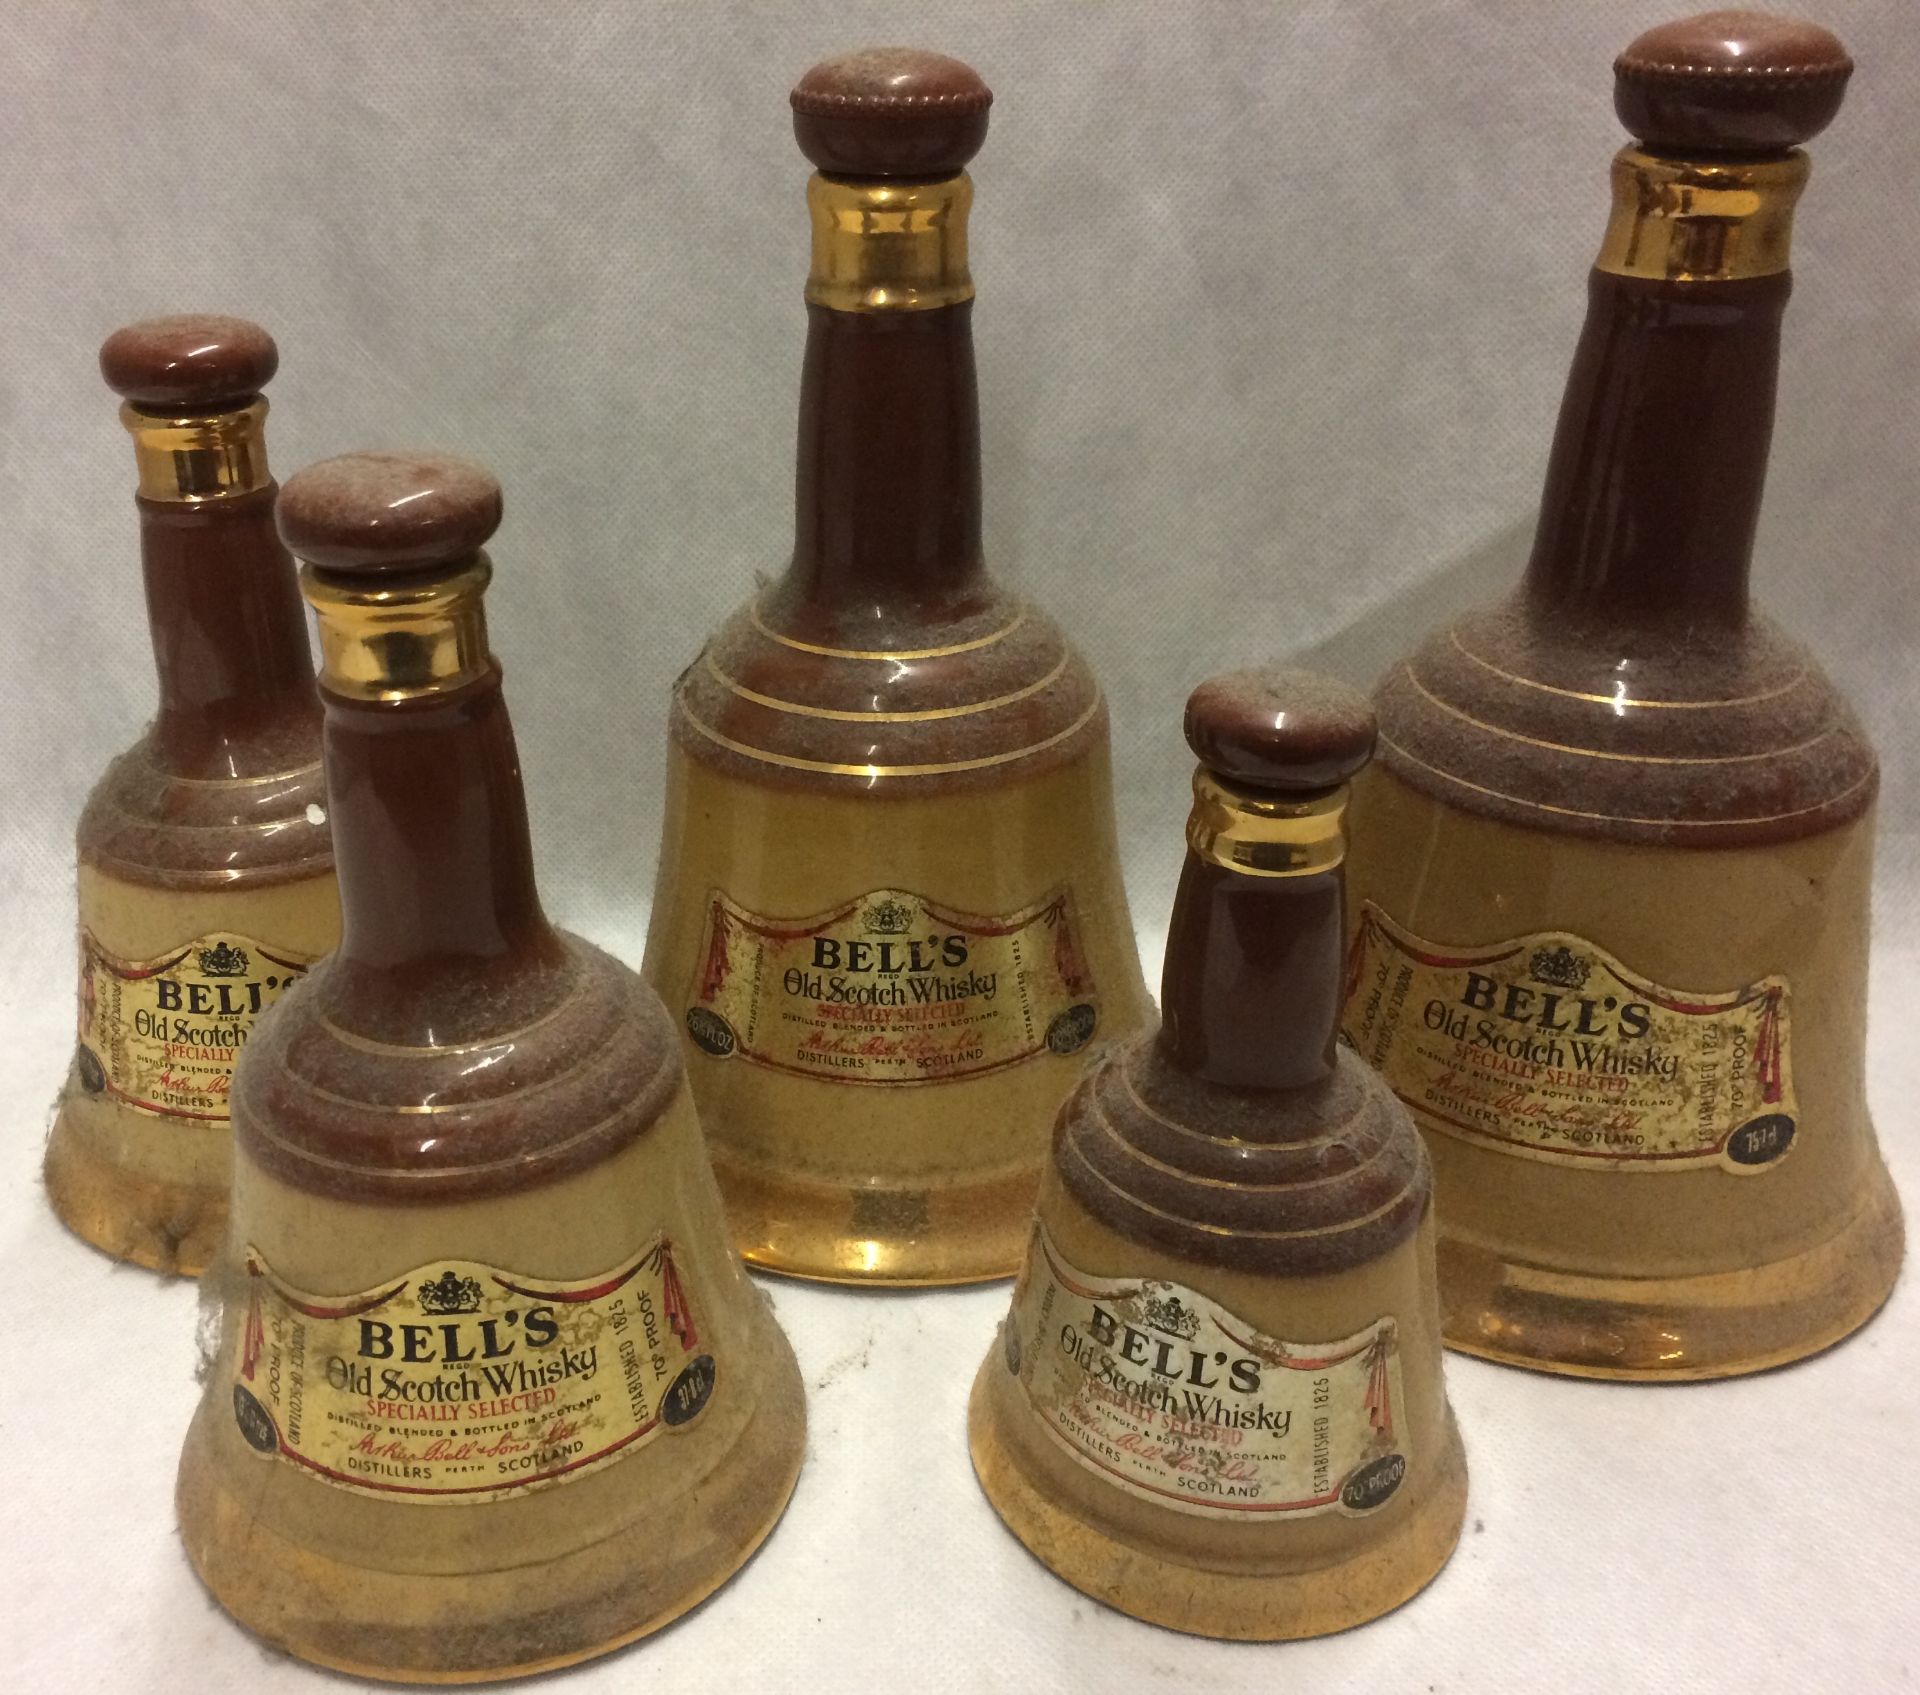 5 x assorted sized Wade porcelain Bell's Old Scotch whisky decanters - no contents